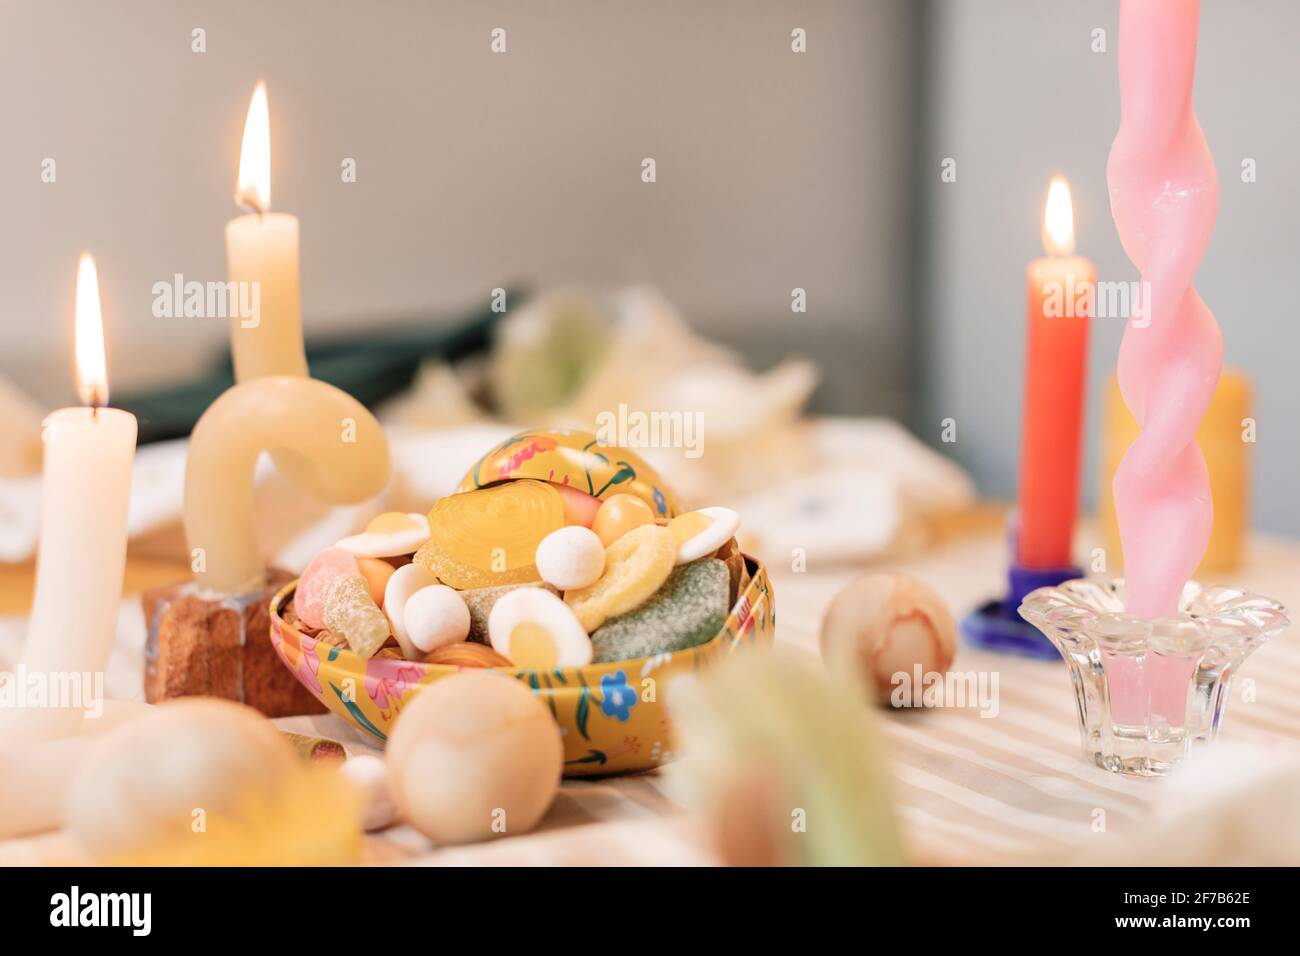 Sweets on Easter table Stock Photo